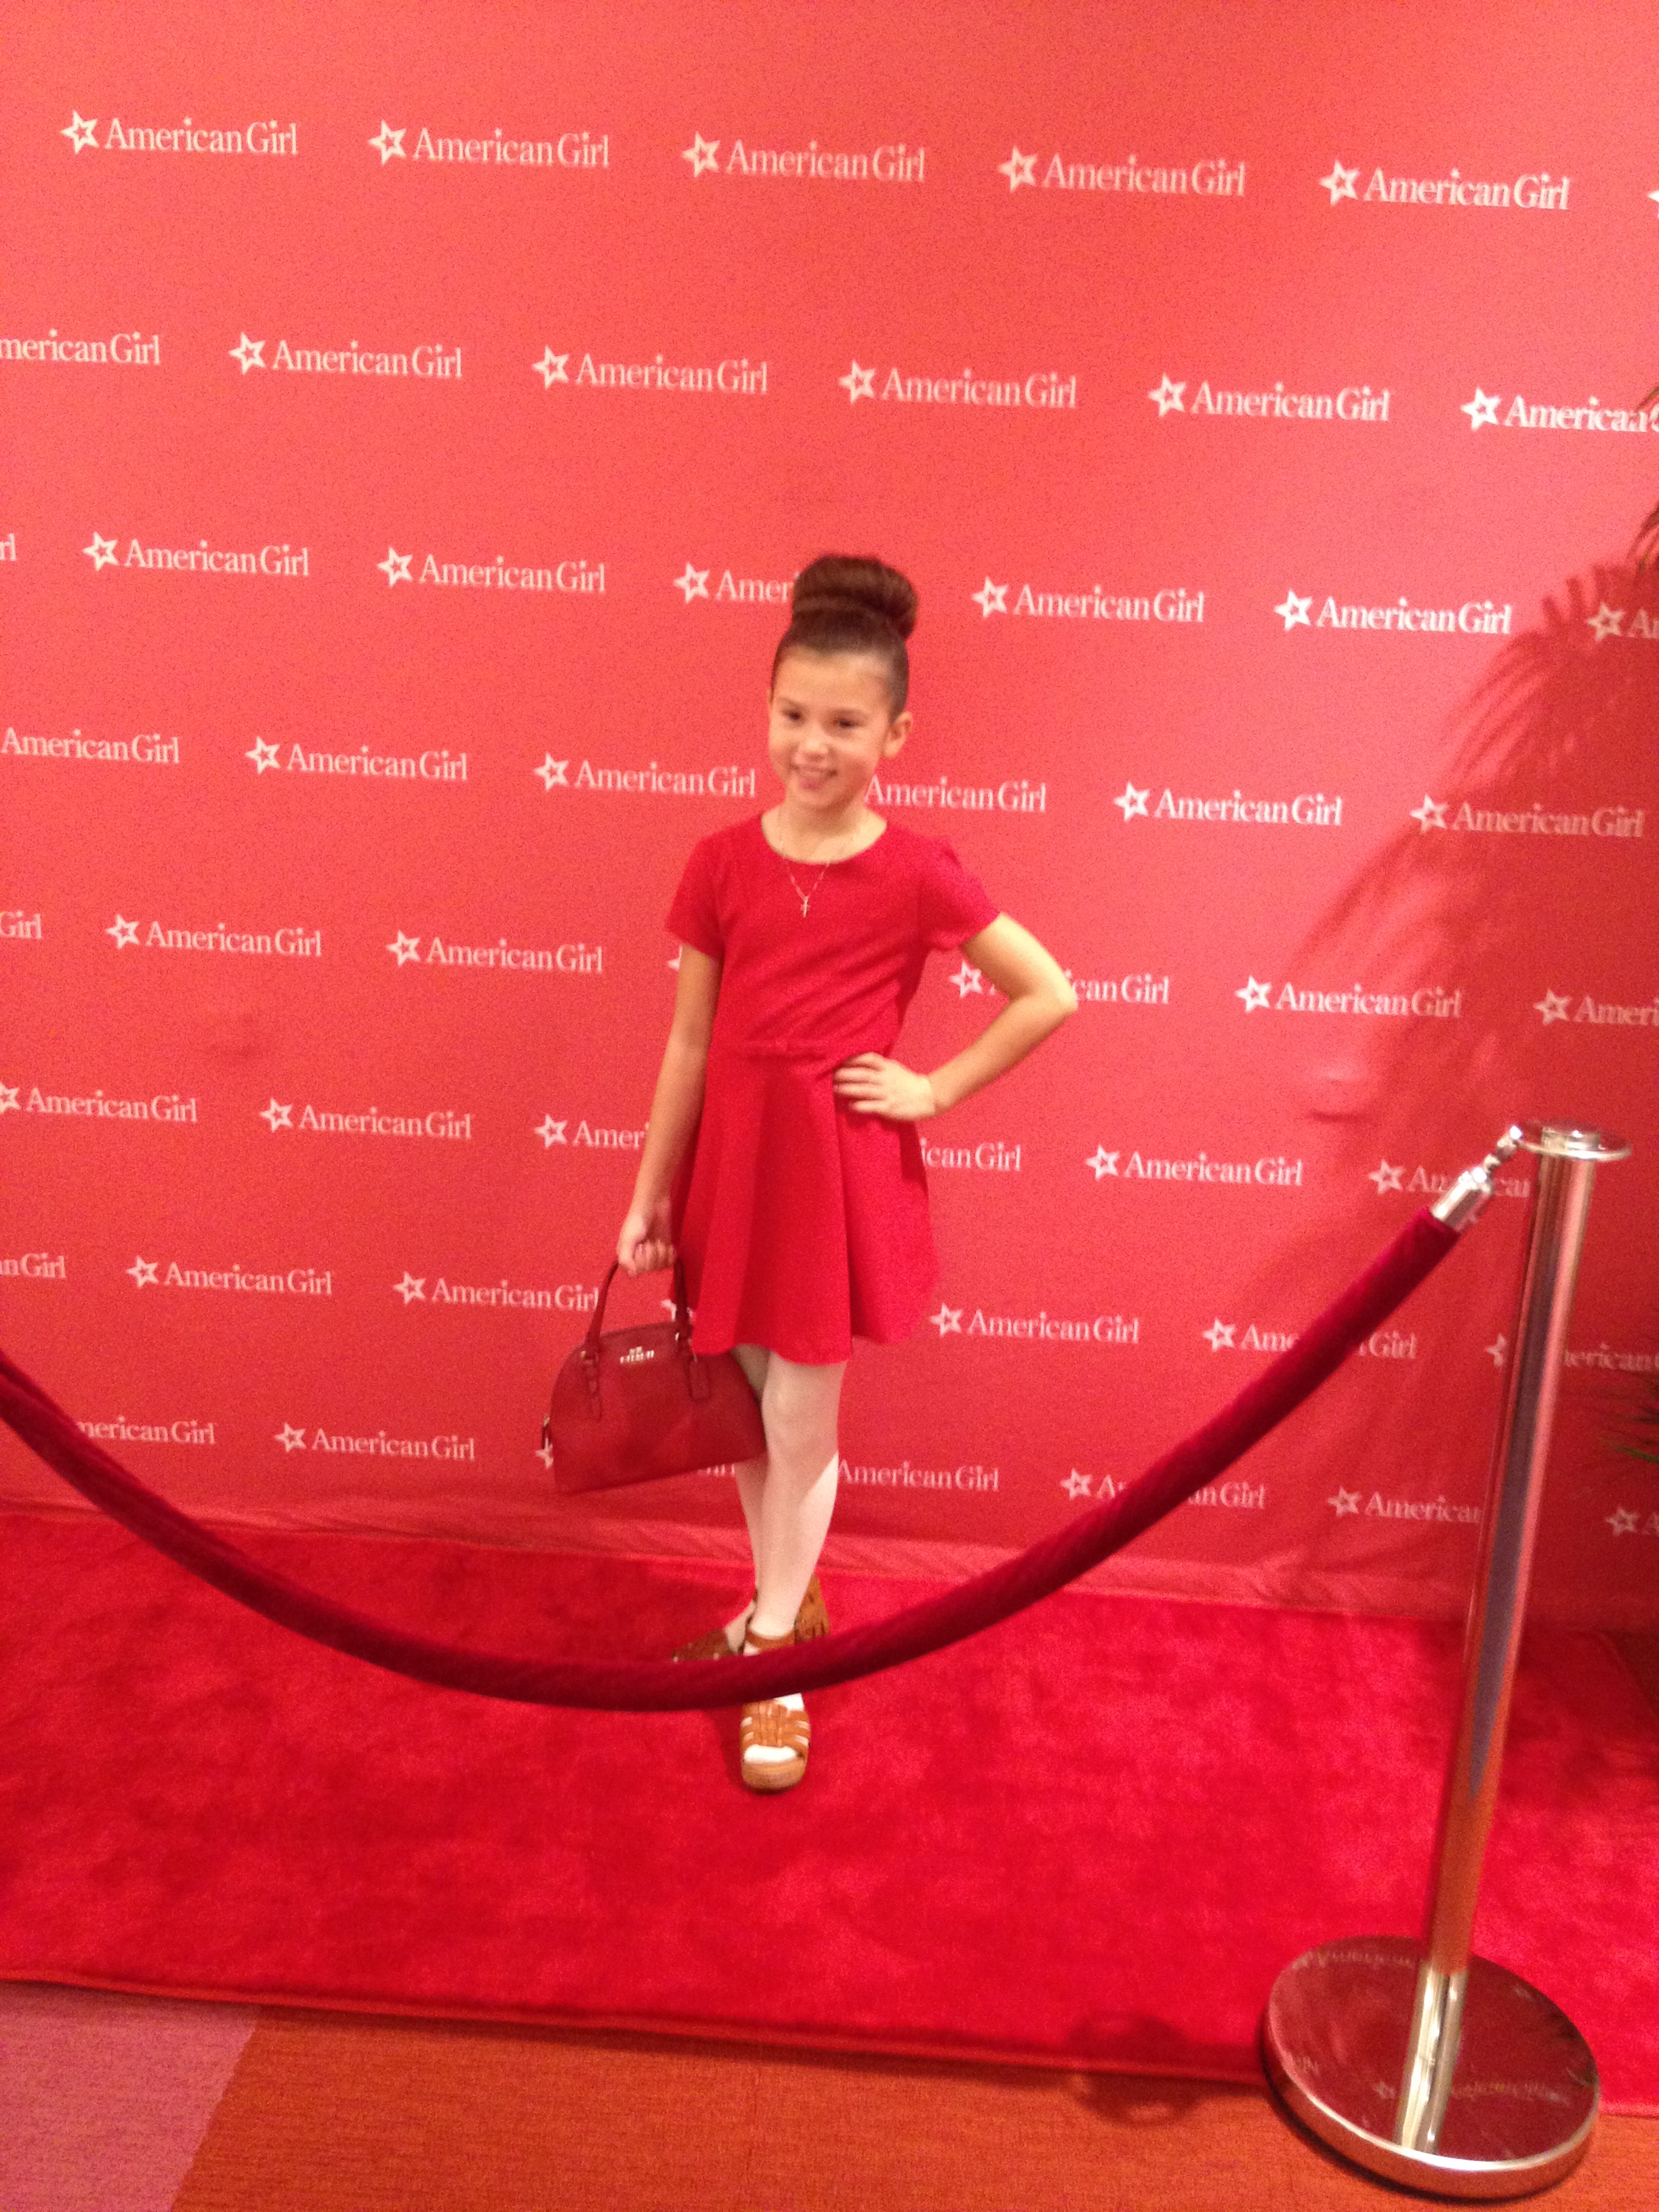 Working the red carpet wearing a Zara dress and a Coach bag.